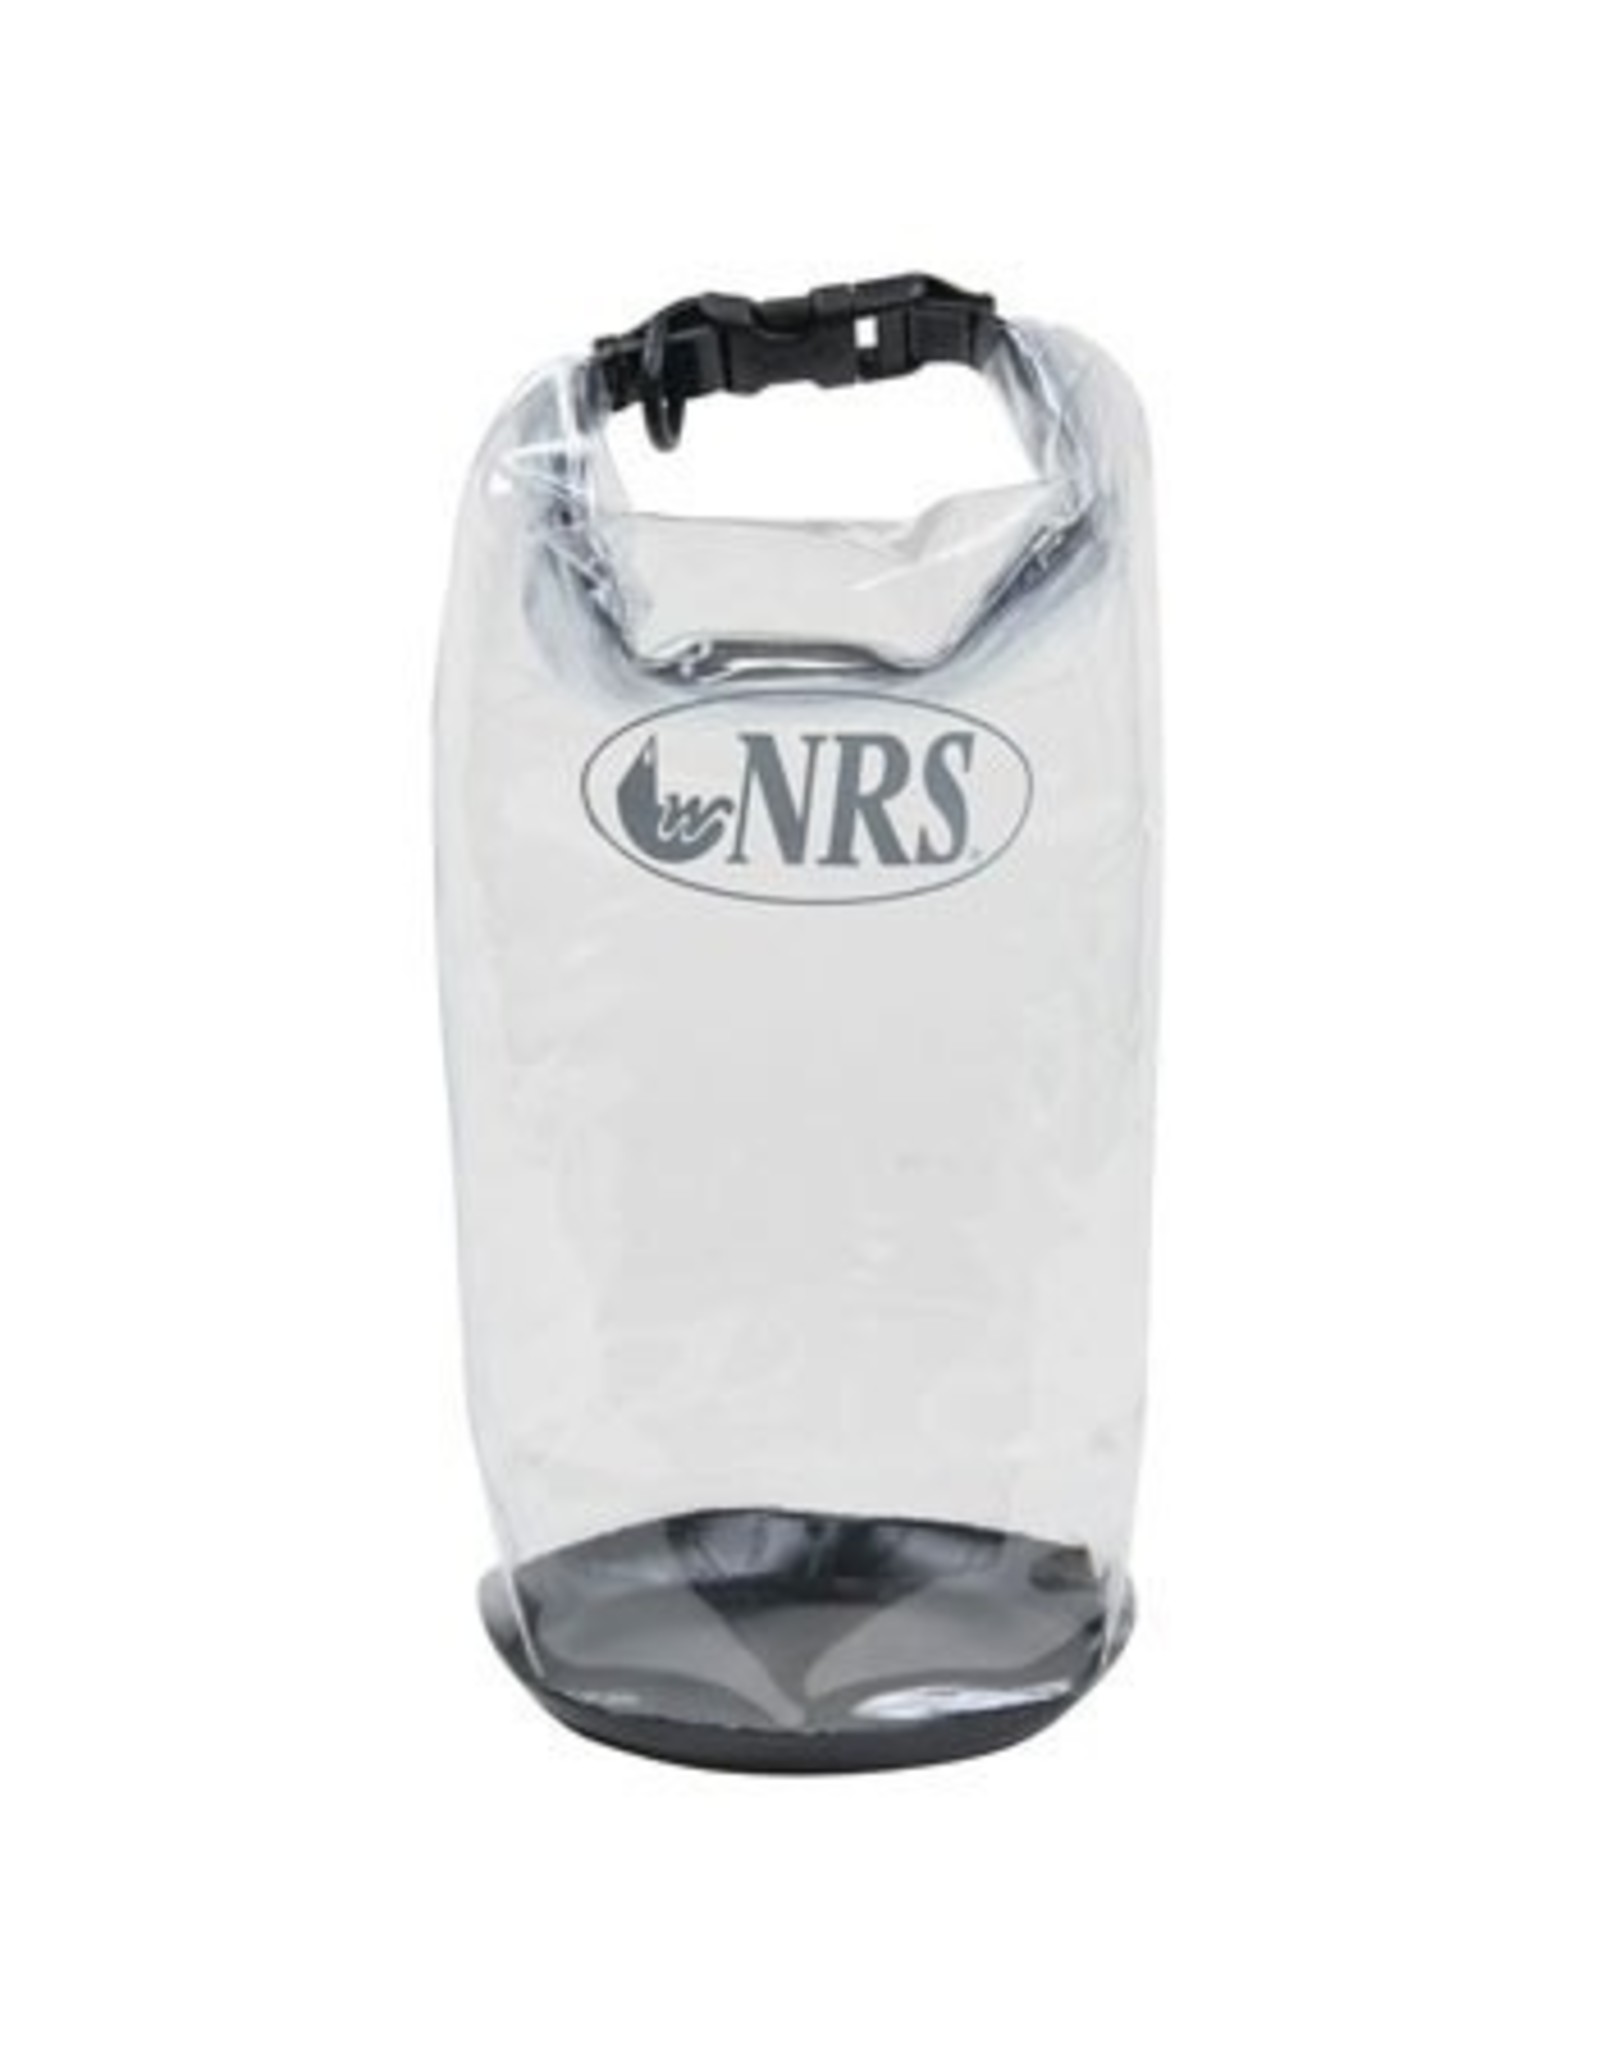 NRS NRS Dri-Stow Dry Bag S Clear